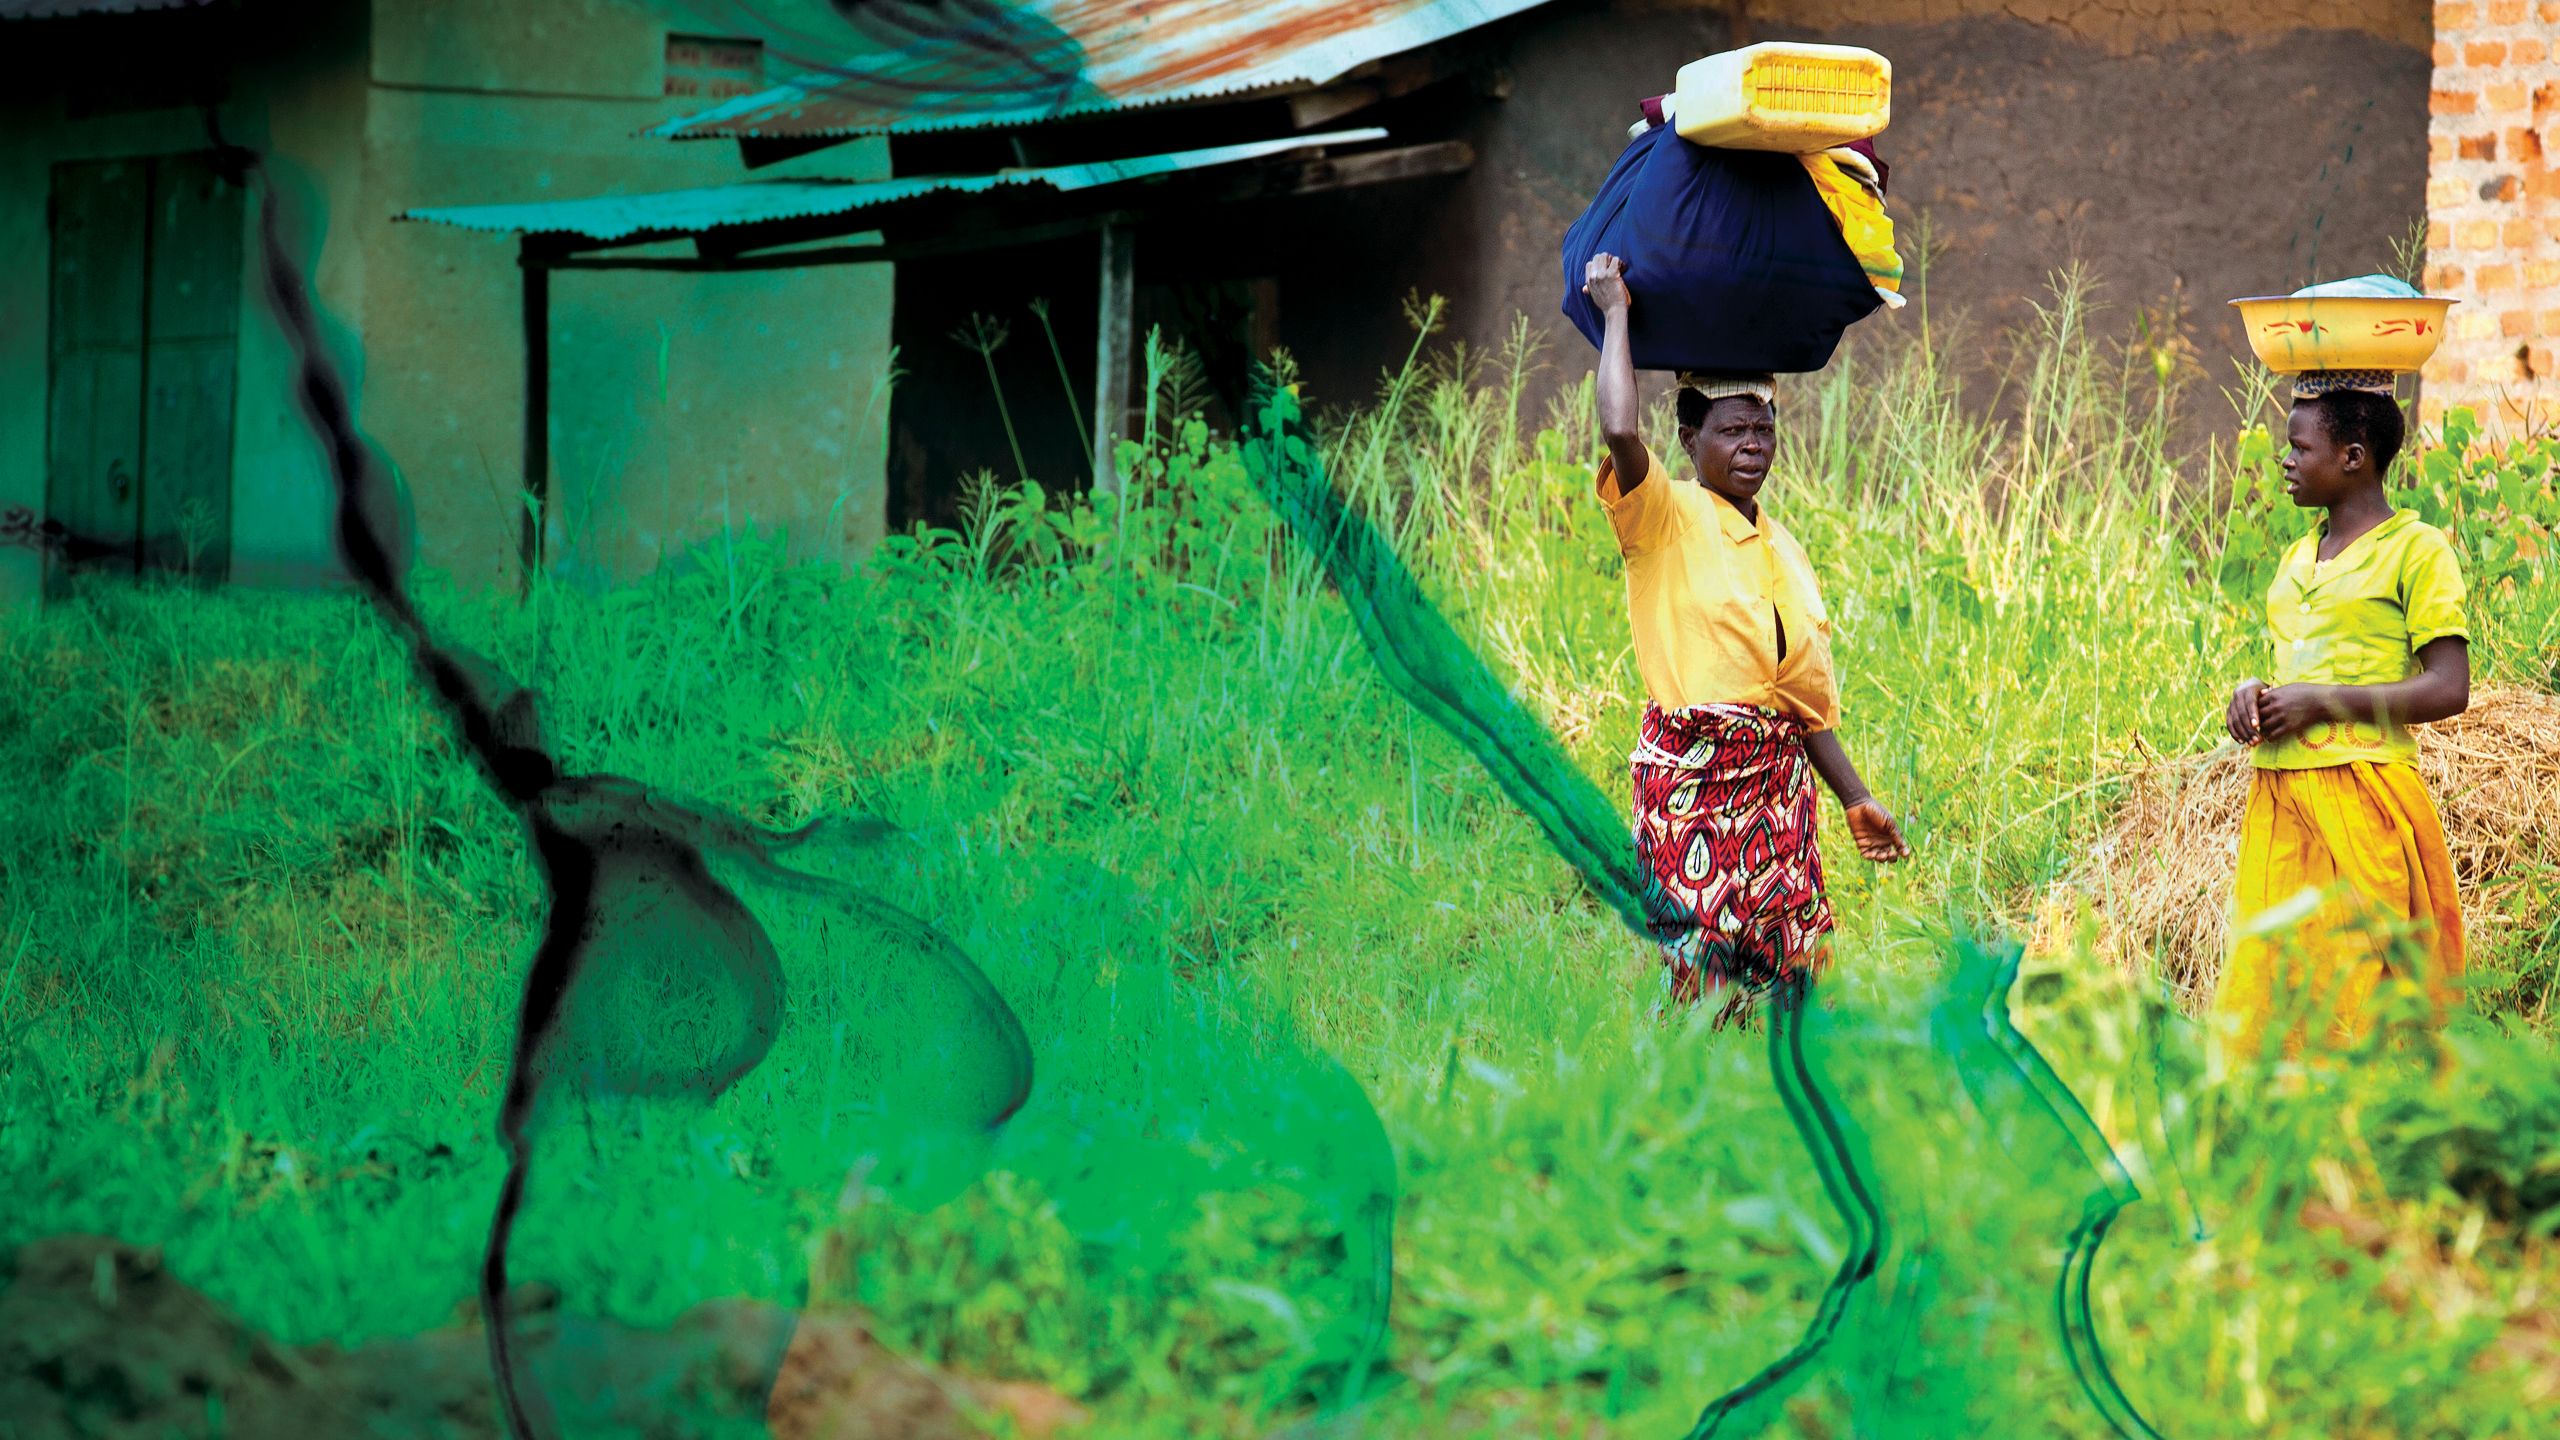 A MOTHER AND DAUGHTER CARRYING BUCKETS OF WATER.